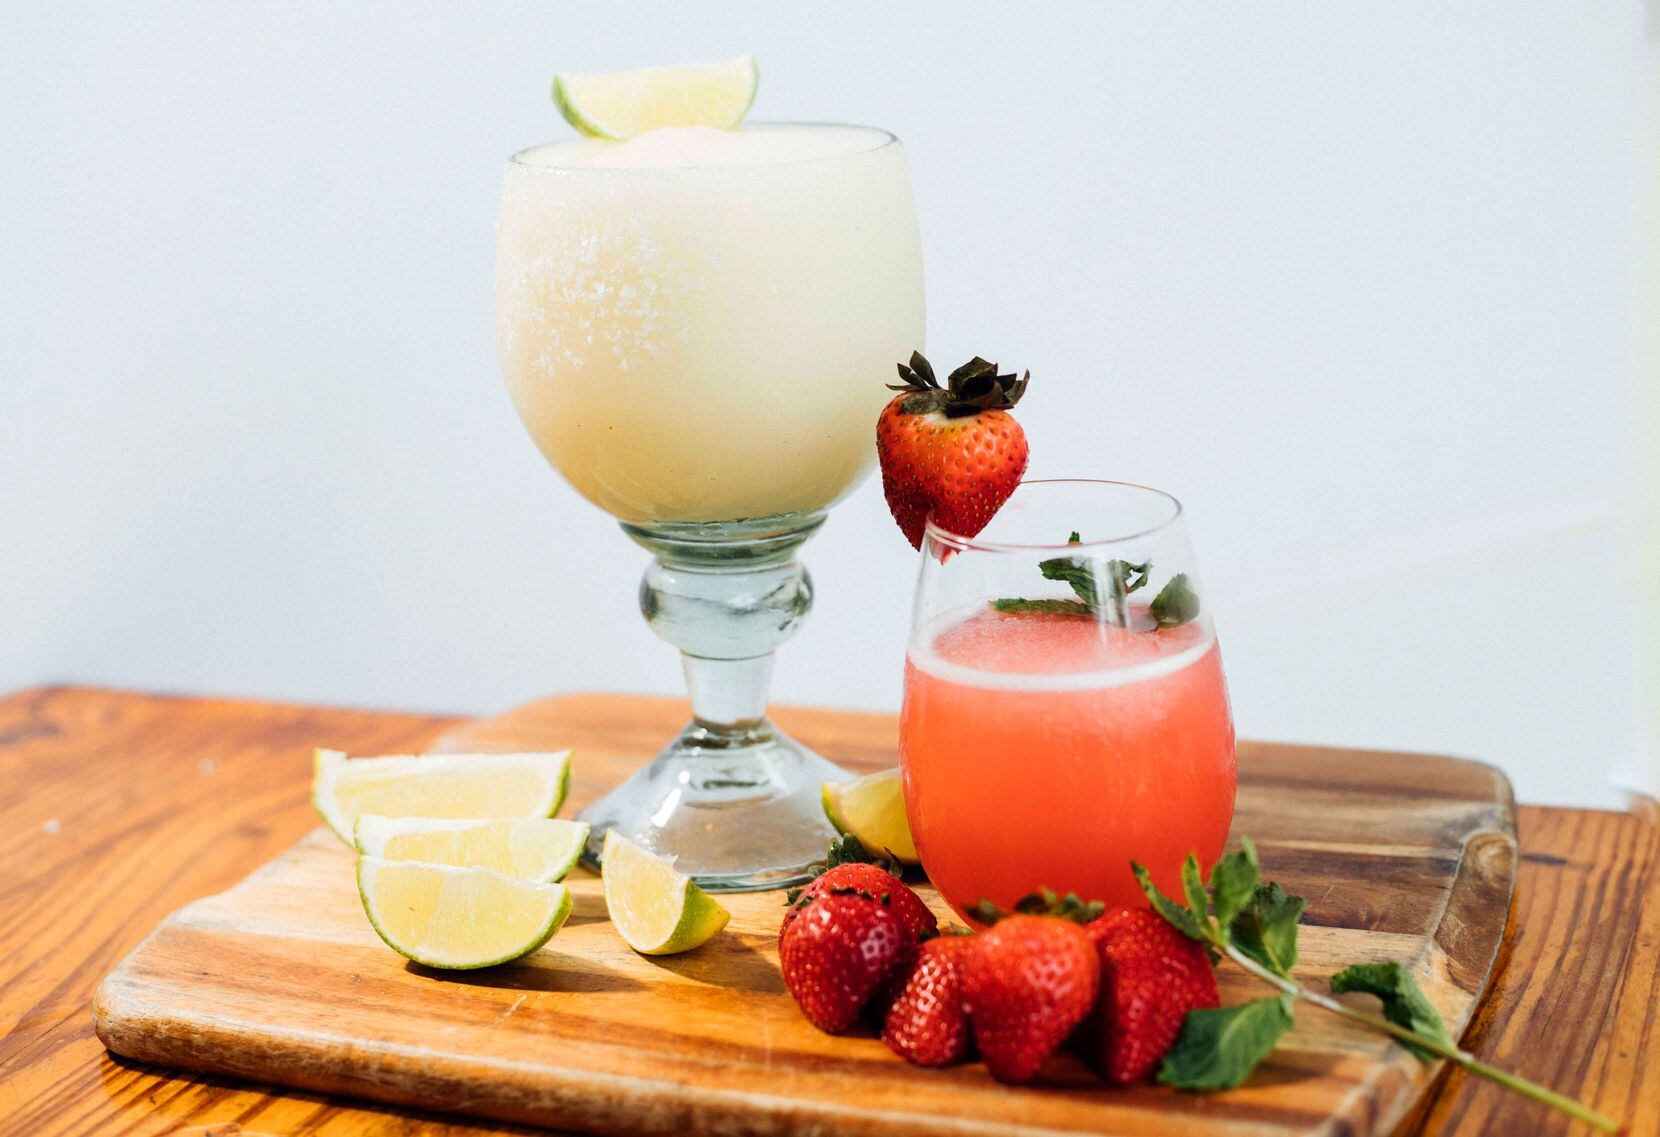 The Rustic is celebrating National Tequila Day, July 24, with frozen margaritas.